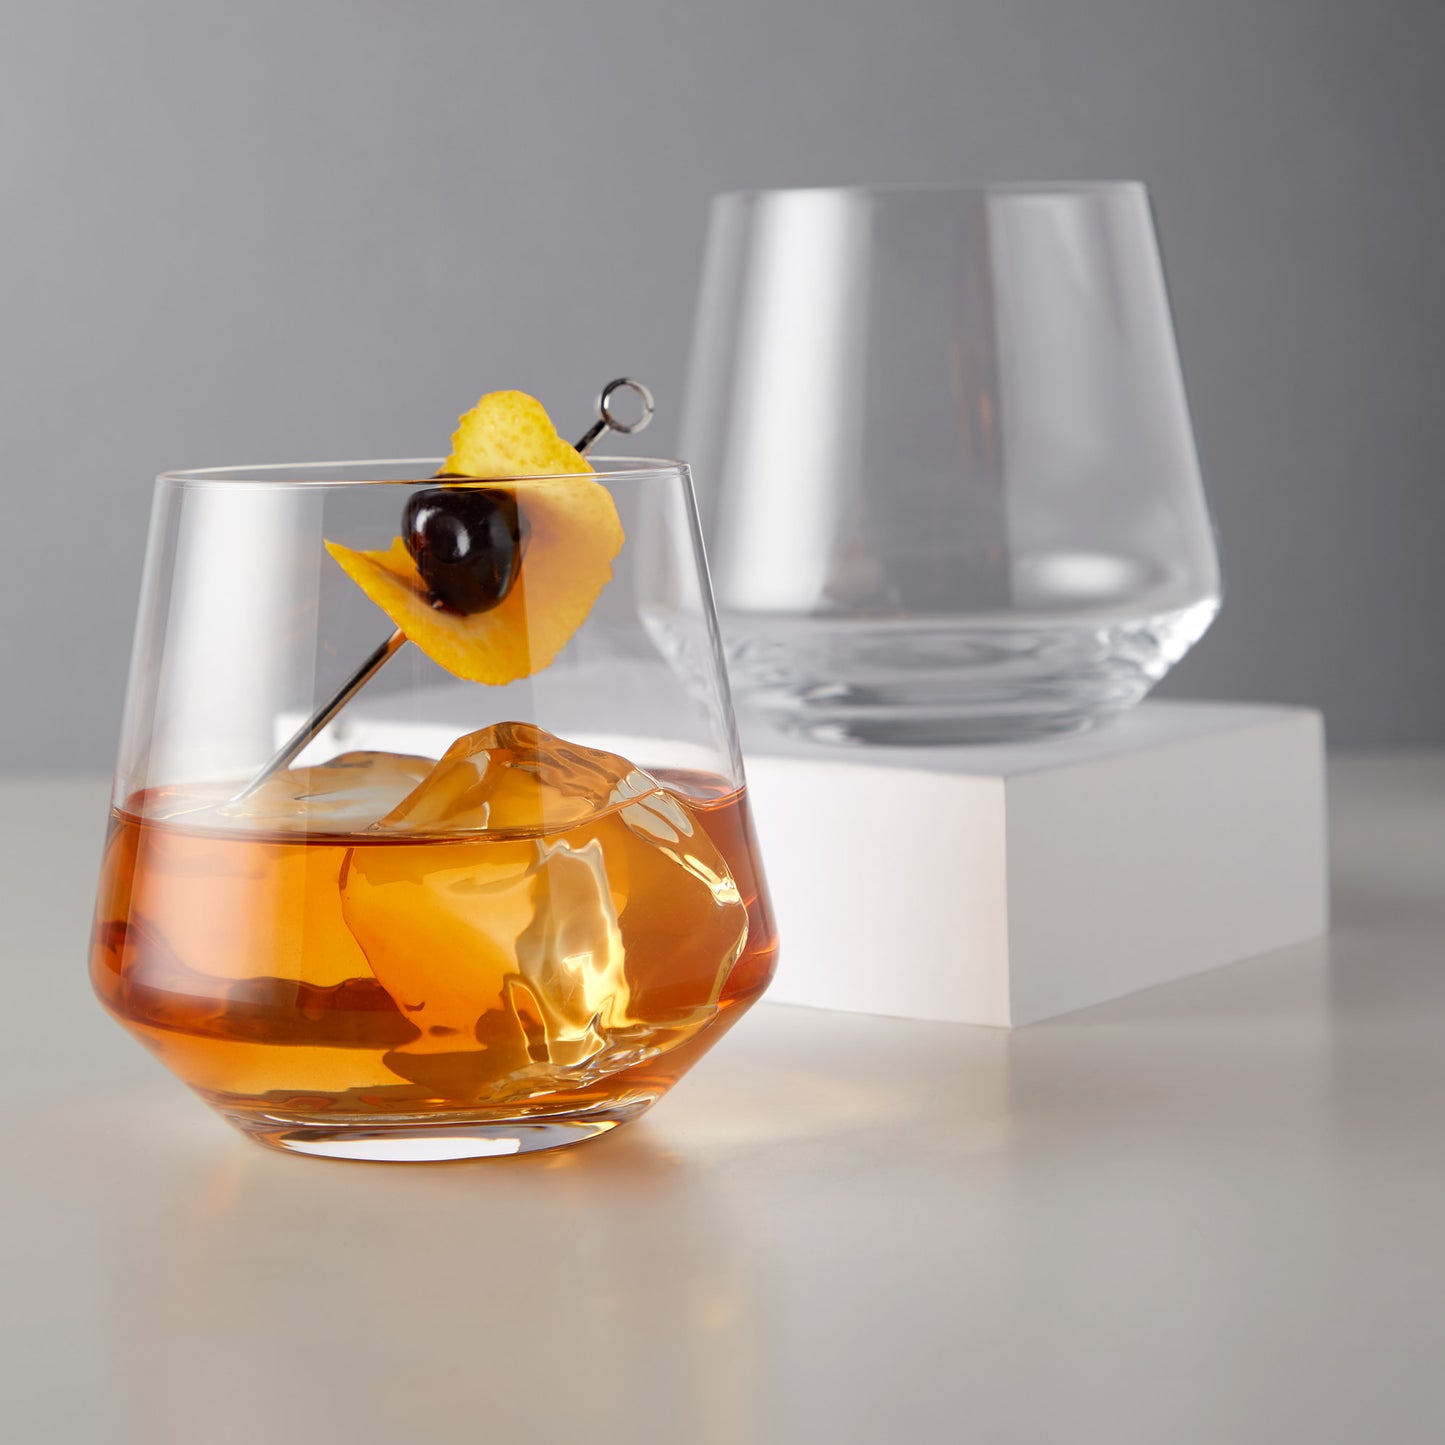 Angled Crystal Cocktail Tumblers